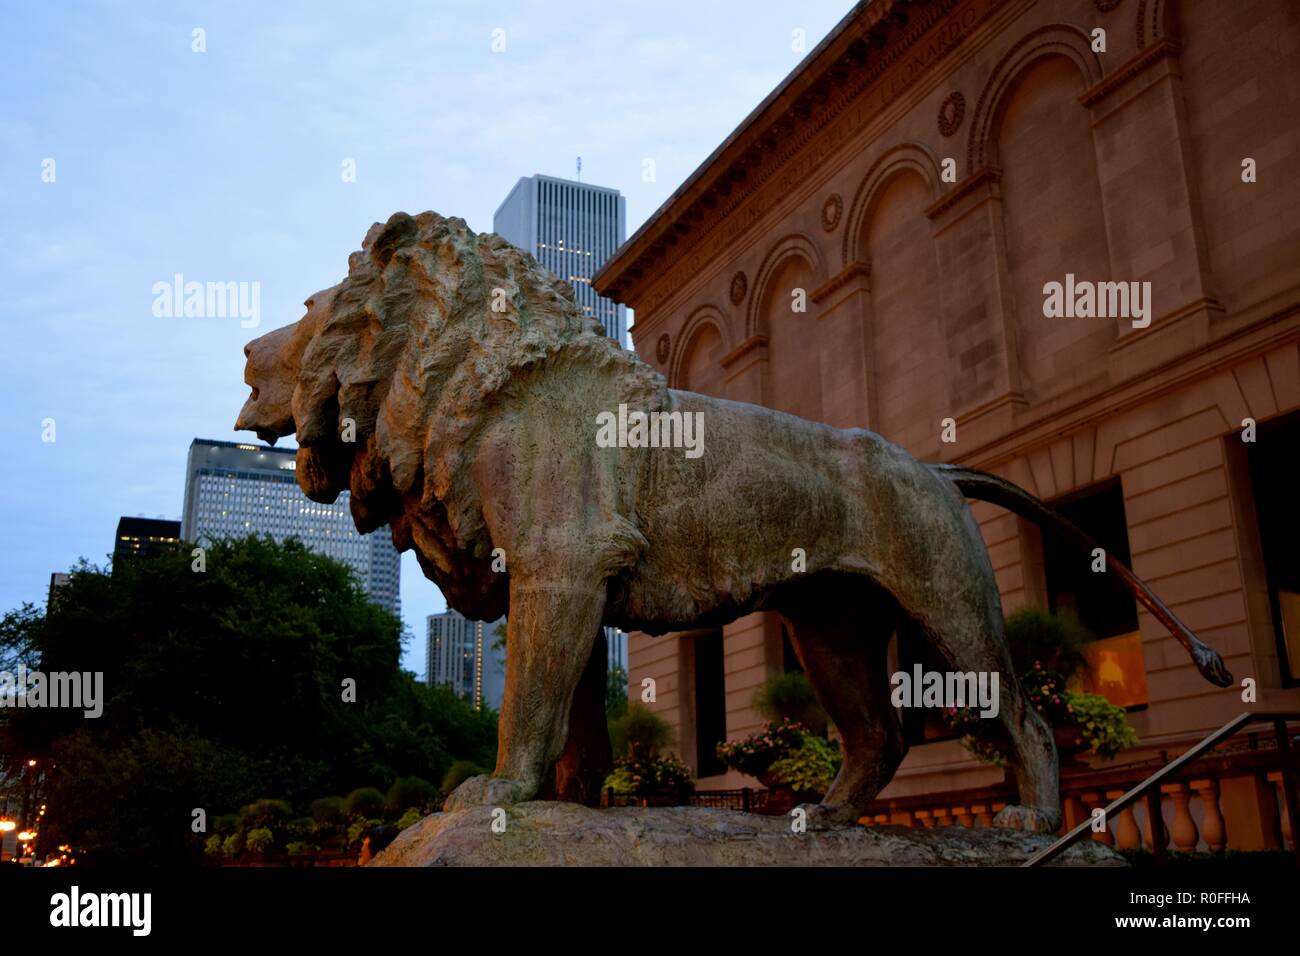 One of two Lions at the entrance of the Art Institute of Chicago.  Established in 1893, the museum is one of the oldest and largest in the USA  Stock Photo - Alamy